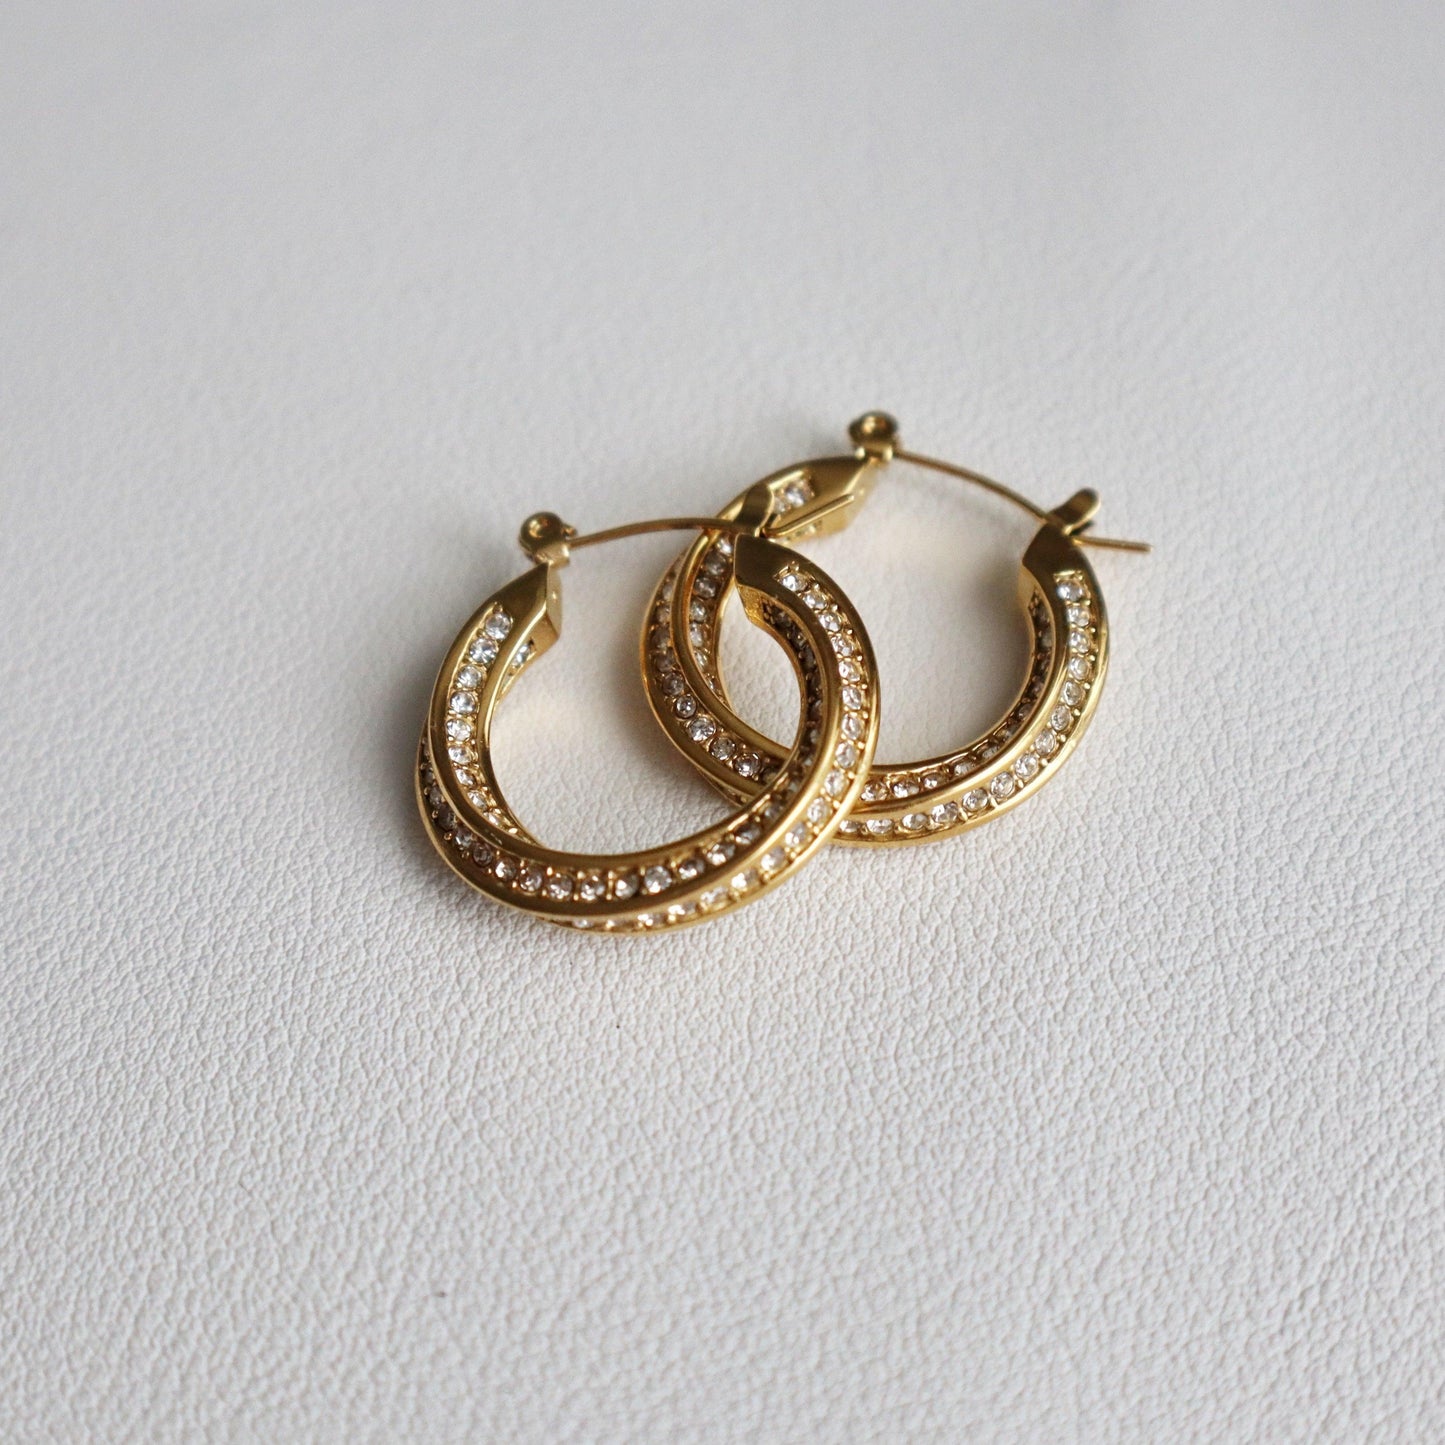 Ellie Hoops | CZ Gold Hoops - JESSA JEWELRY | GOLD JEWELRY; dainty, affordable gold everyday jewelry. Tarnish free, water-resistant, hypoallergenic. Jewelry for everyday wear